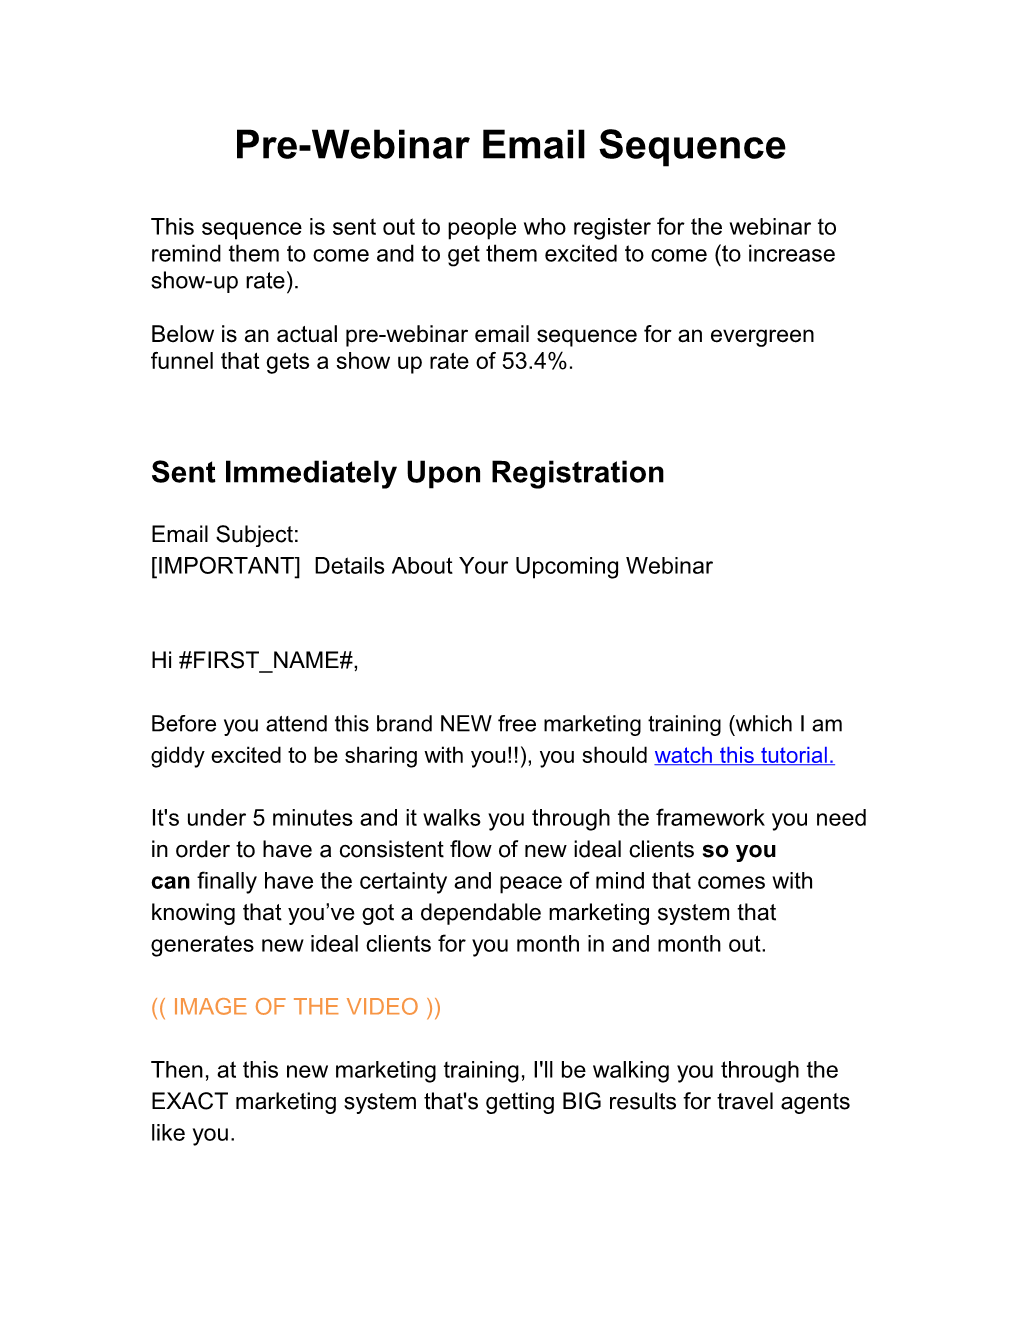 Pre-Webinar Email Sequence